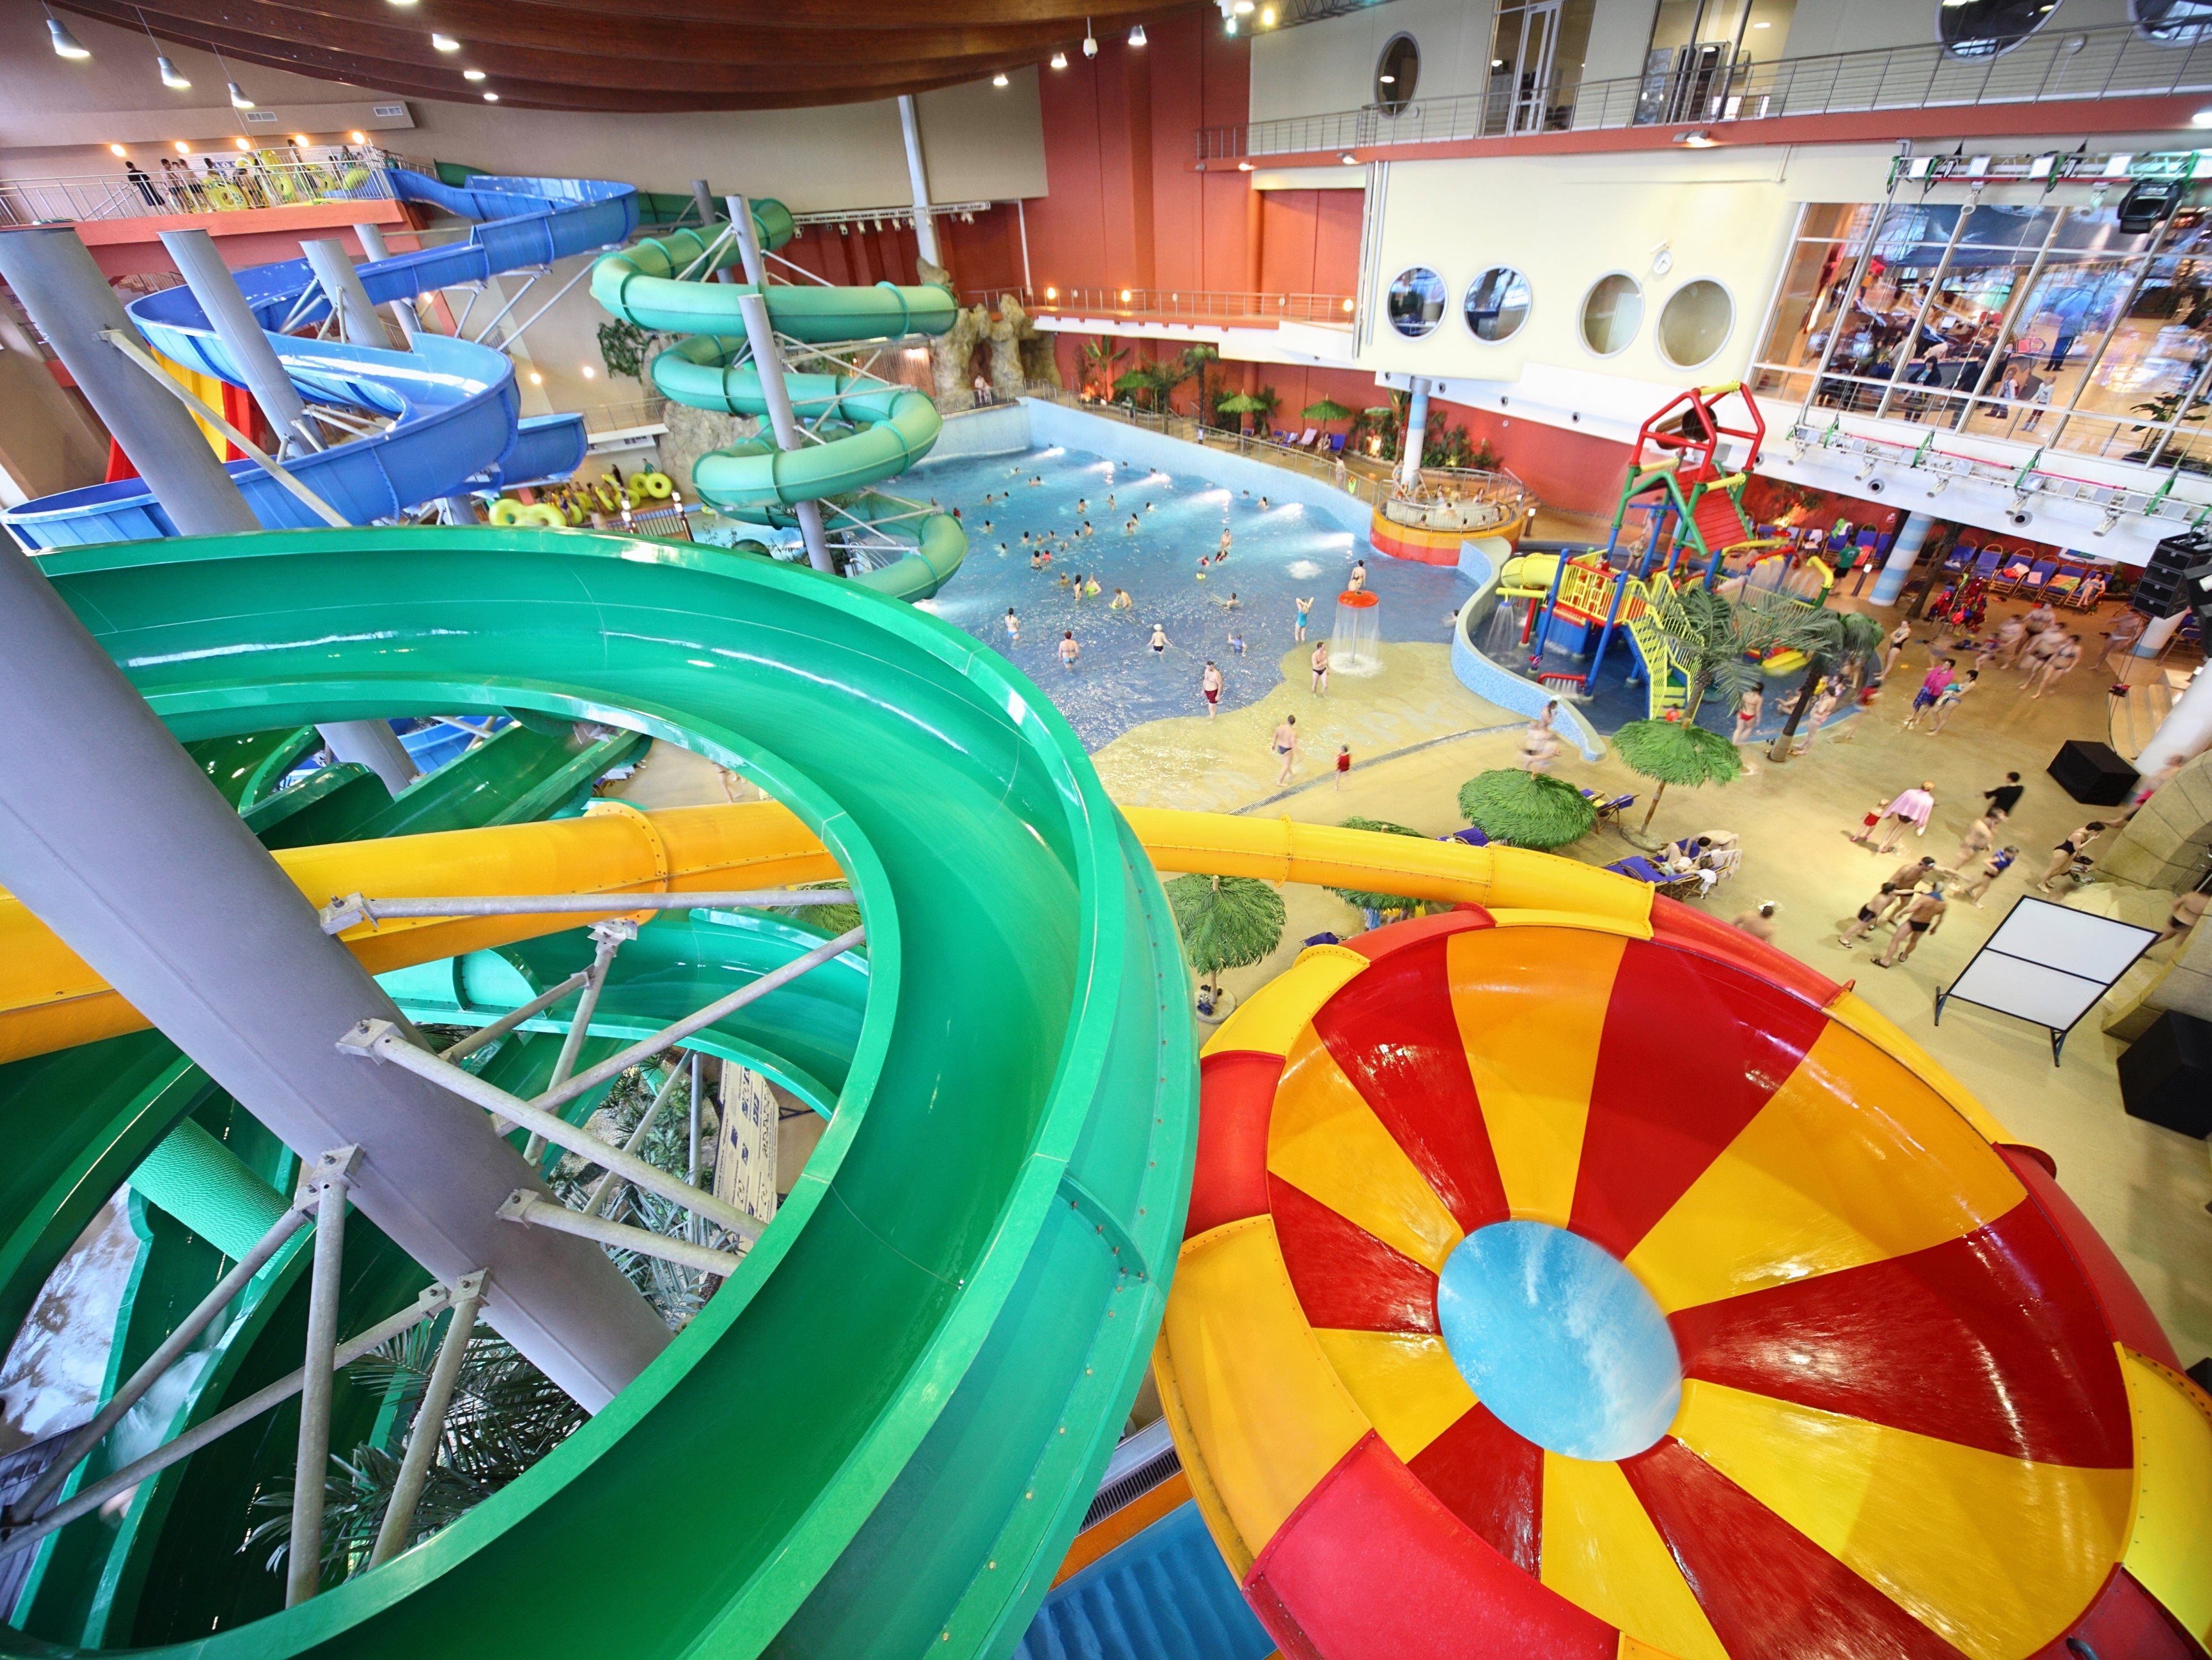 A waterpark in has been evacuated by police after visitors reported having irritated eyes and feeling nauseous (File image)